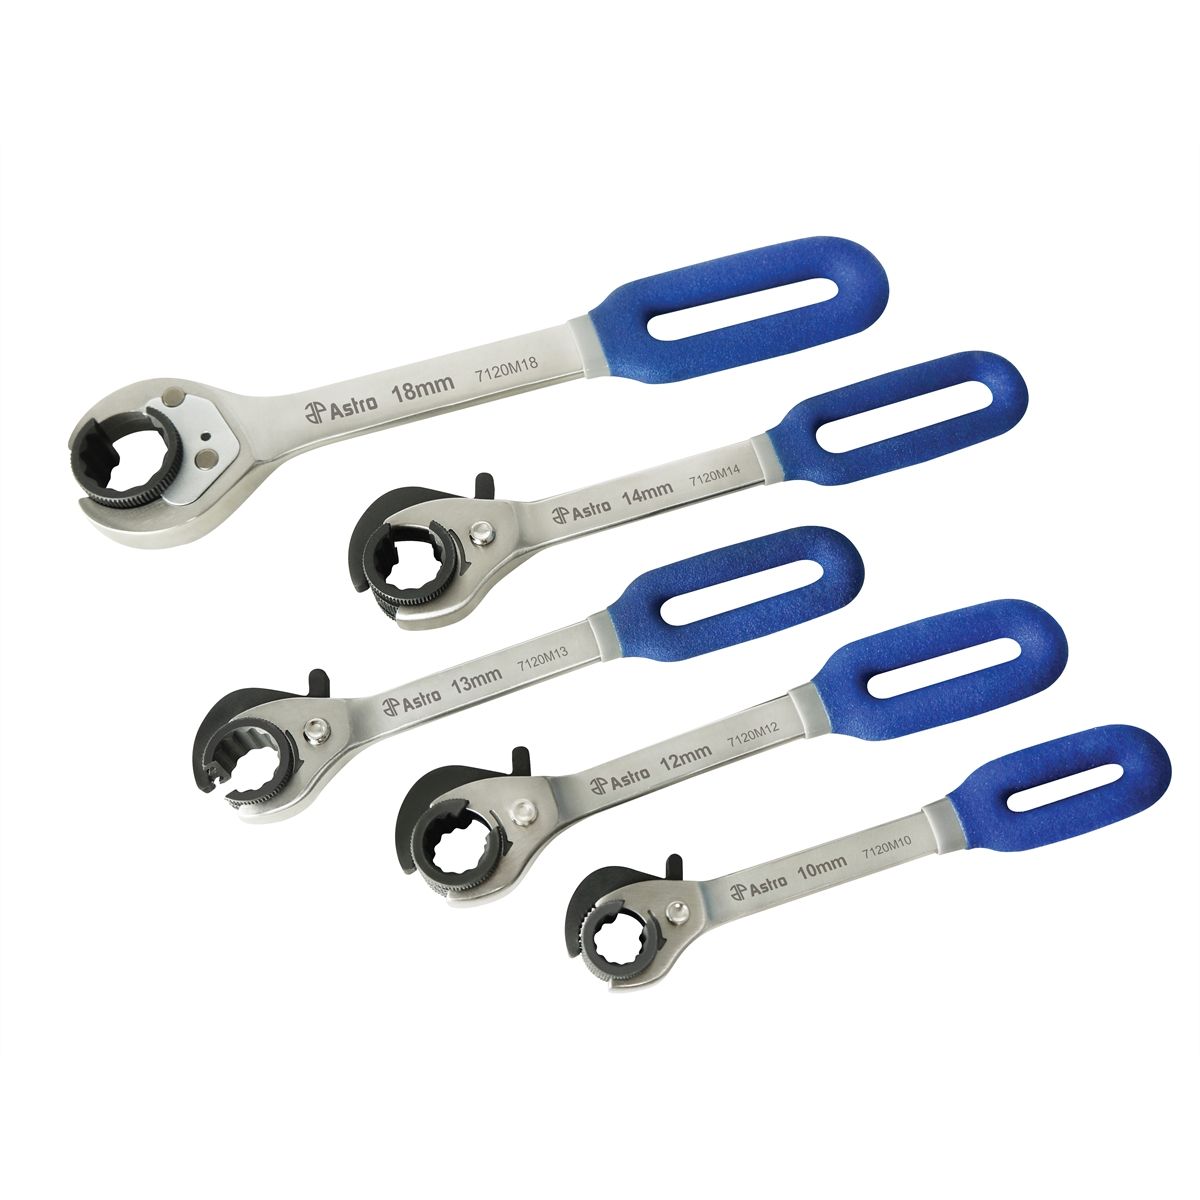 5pc Ratchet & Release Flare Nut Wrench Set -Metric